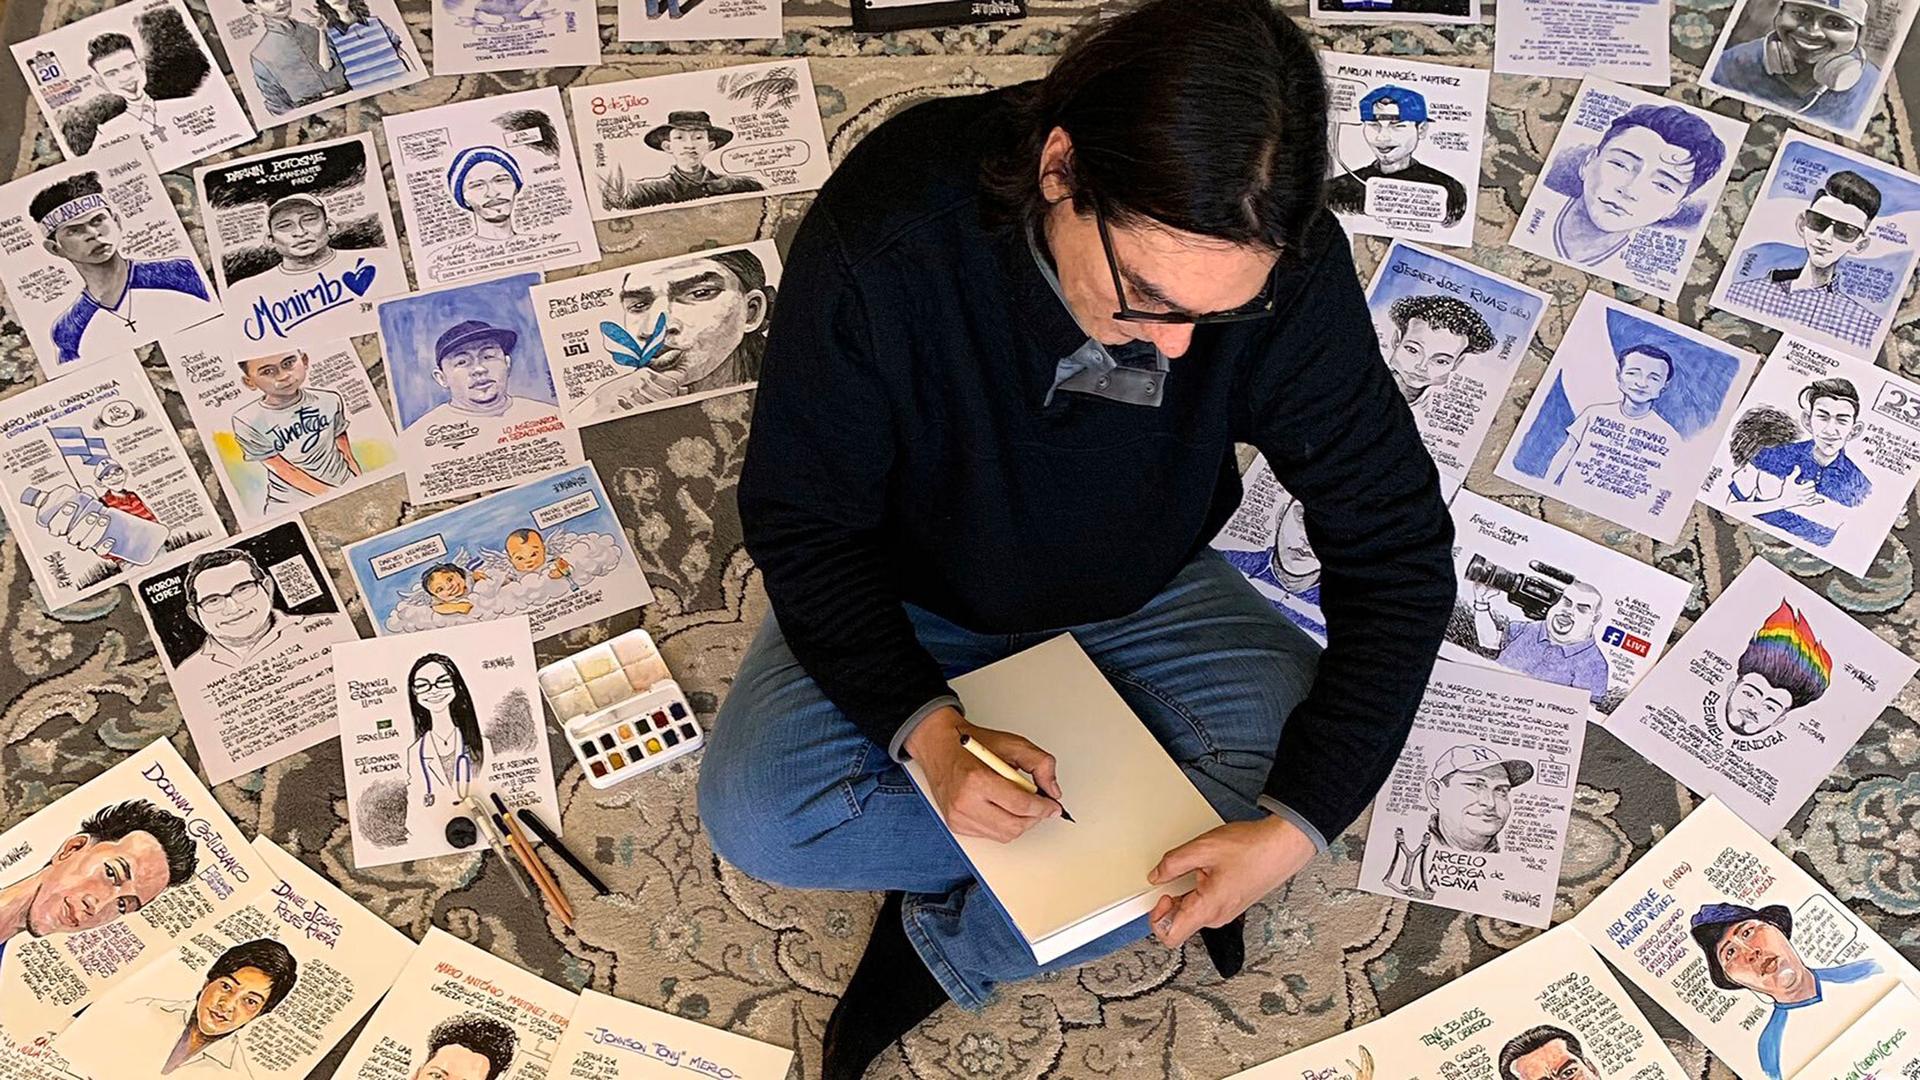 A man is shown sitting cross-legged with dozens of cartoons on the floor all around him.